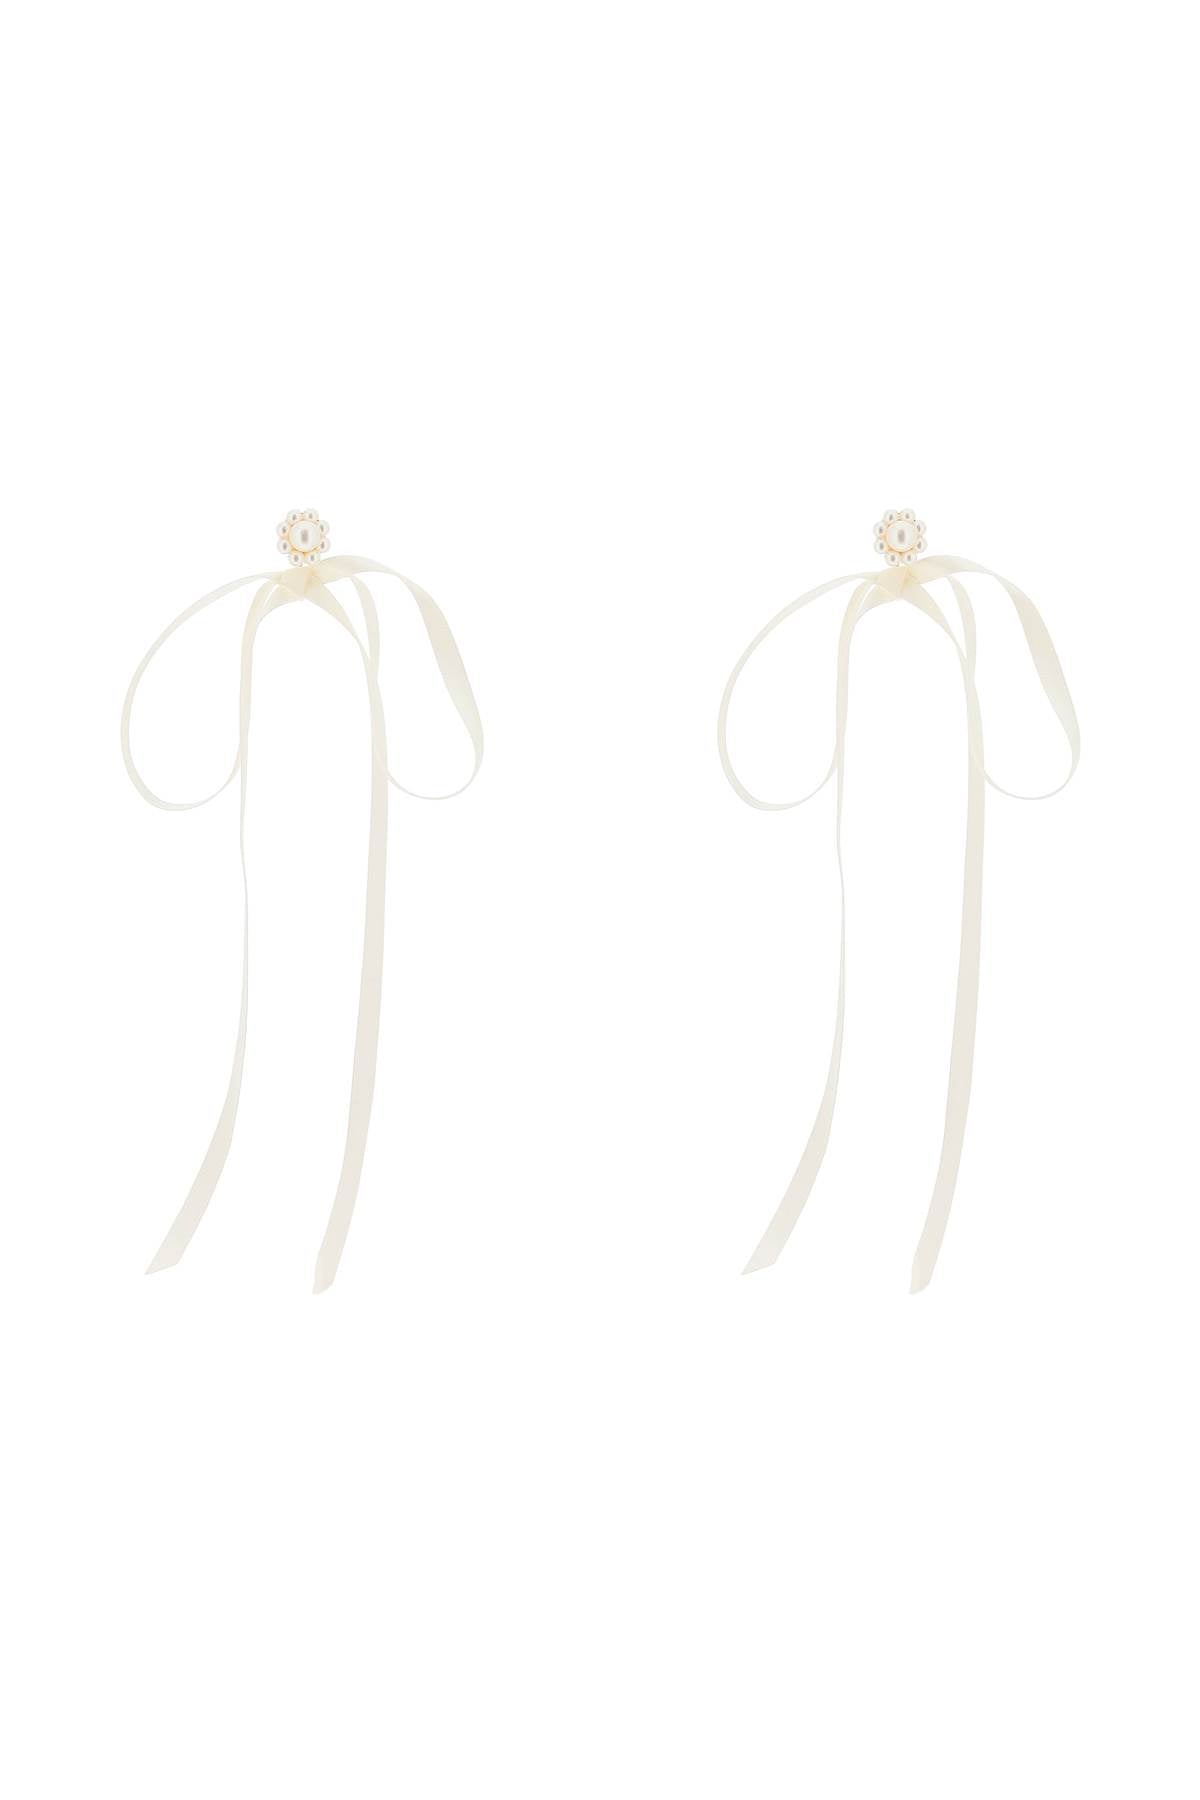 Simone Rocha Button Pearl Earrings With Bow Detail.   White